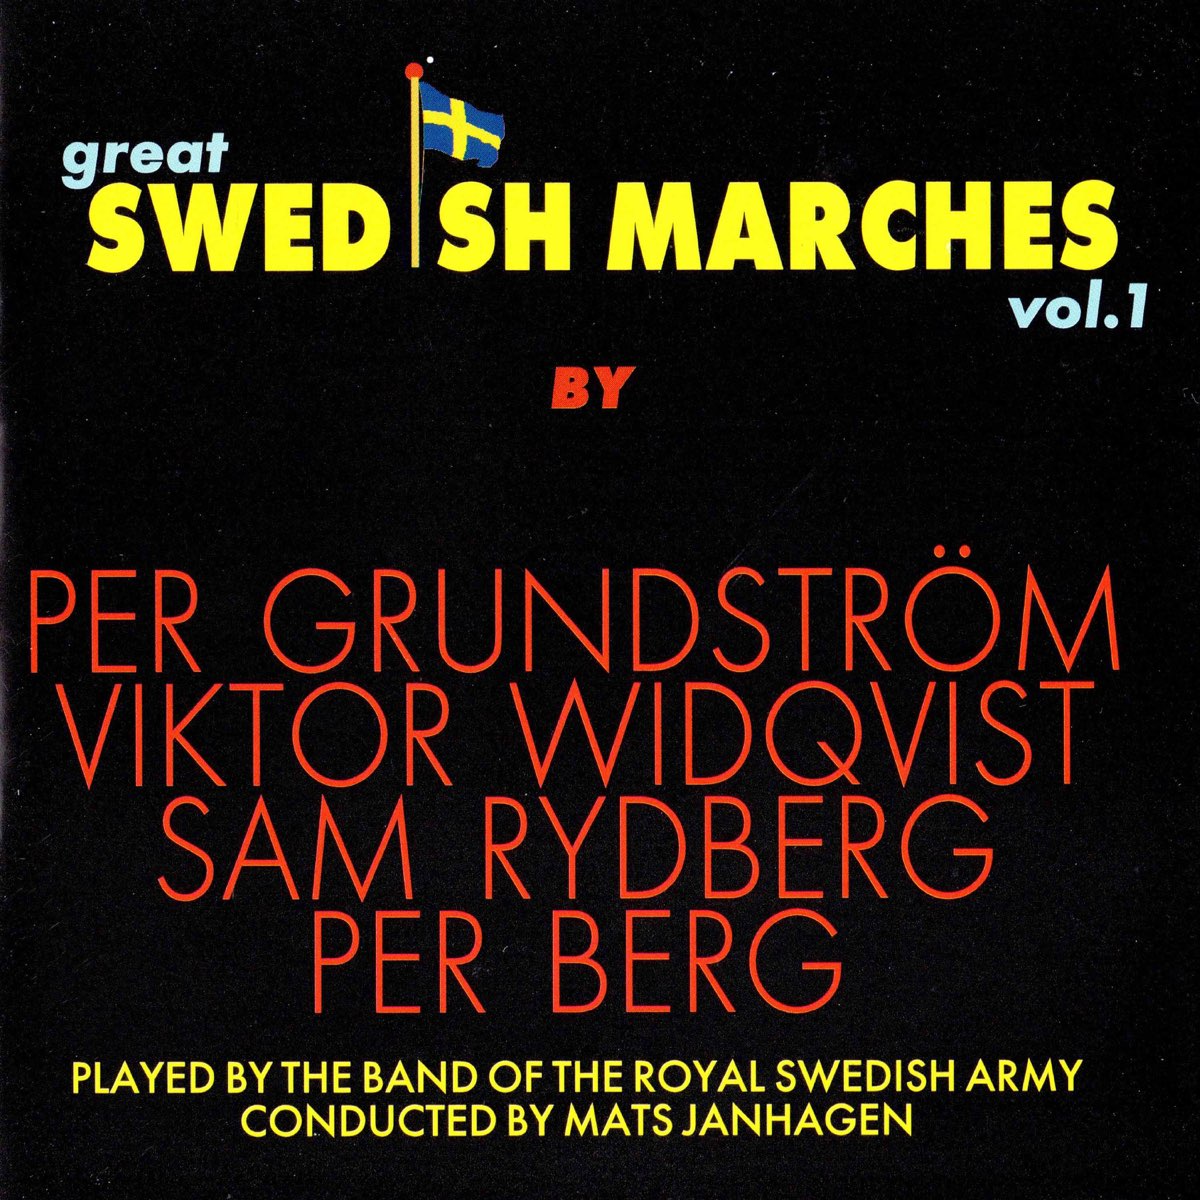 Great Swedish Marches, Vol. 1 by Mats Janhagen & Royal Swedish Army  Conscript Band on Apple Music